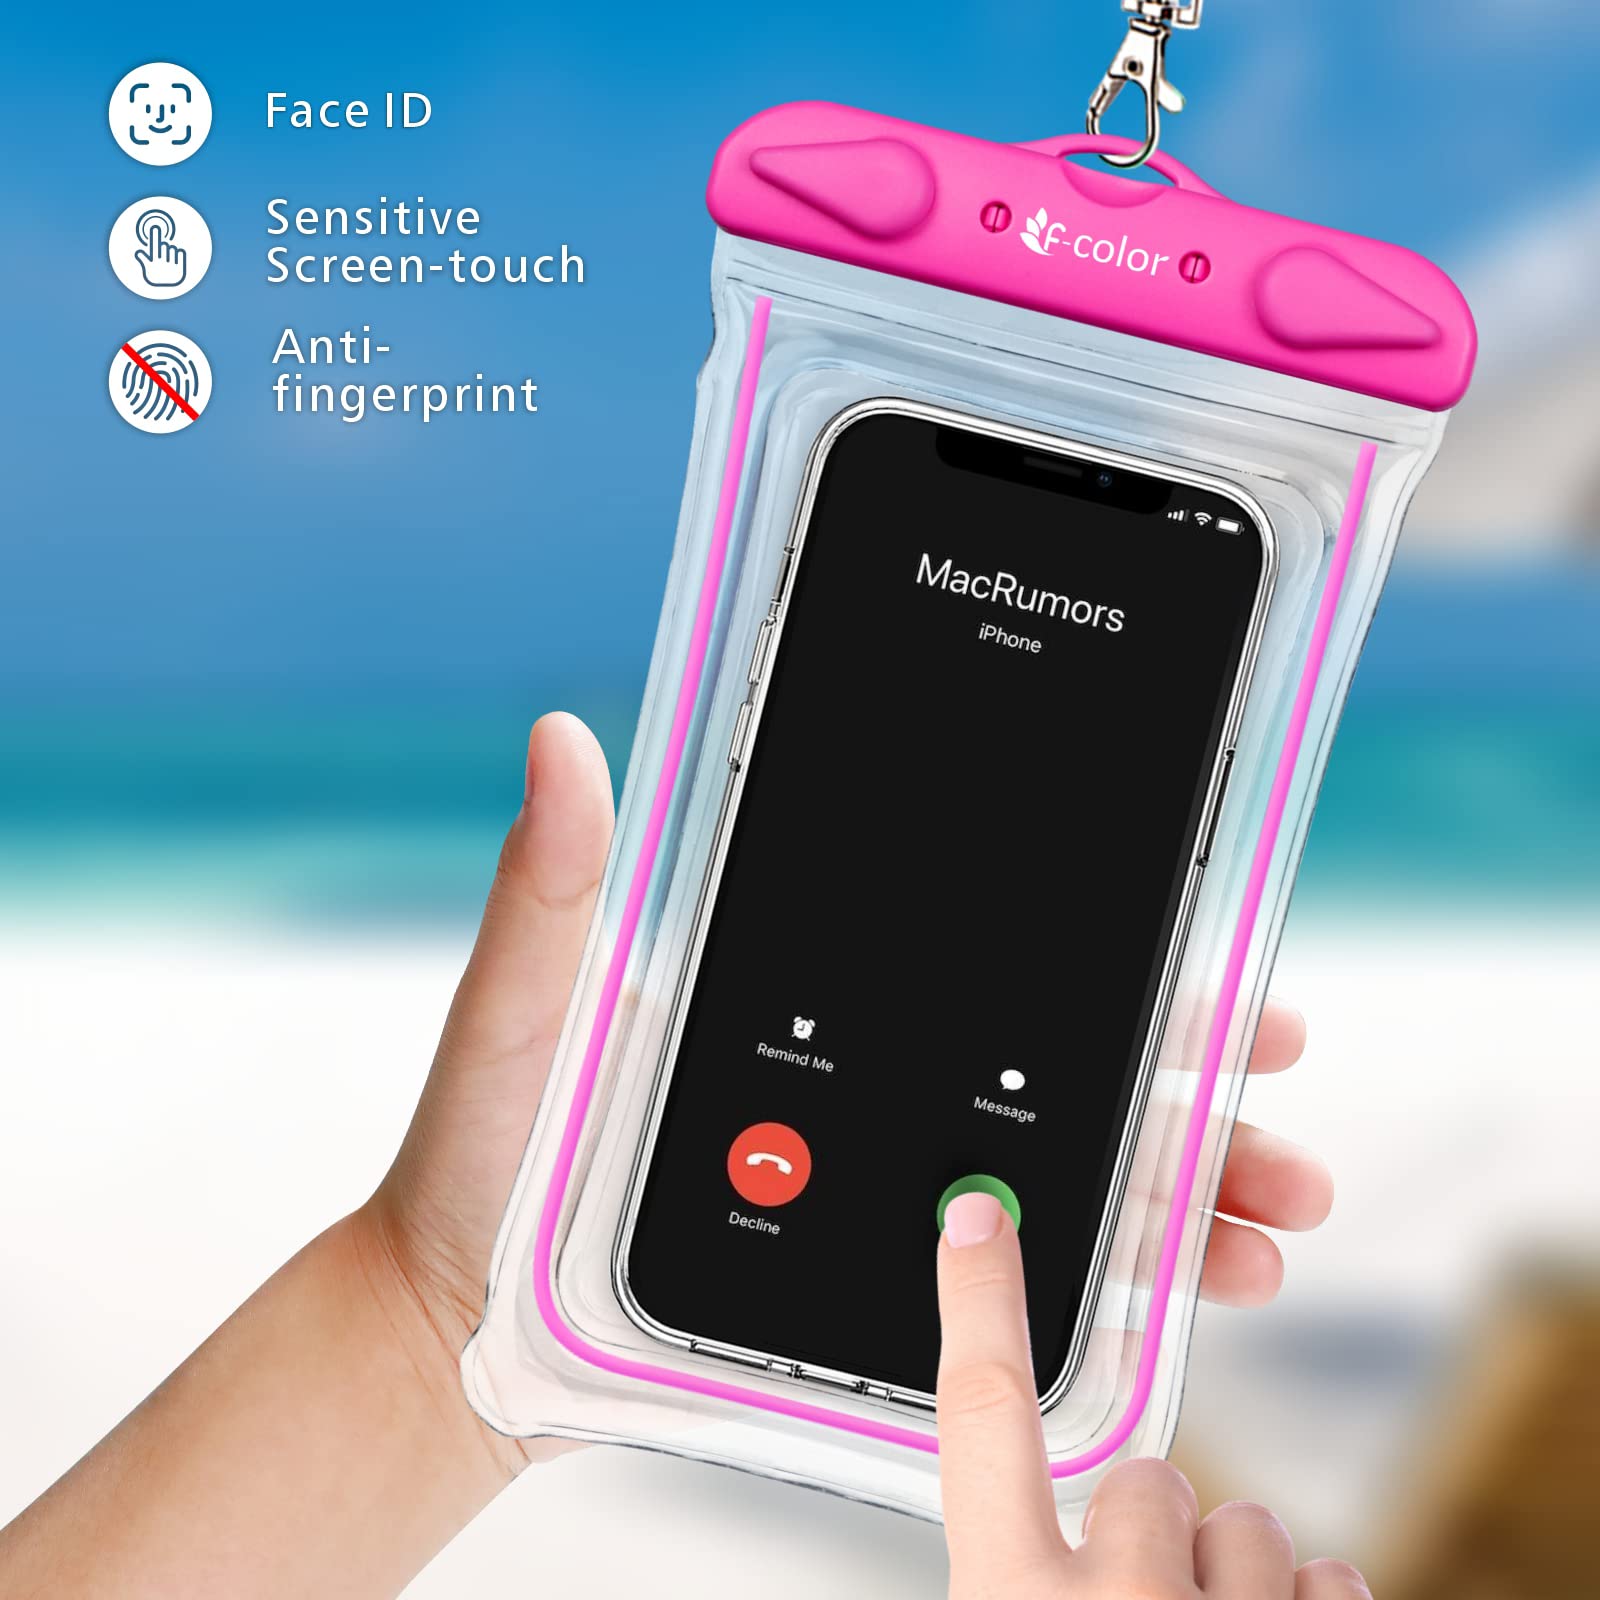 F-color Waterproof Phone Pouch - Waterproof Phone Case - Phone Water Protector Pouch for iPhone 14 13 12 Pro Samsung Galaxy up to 7.2